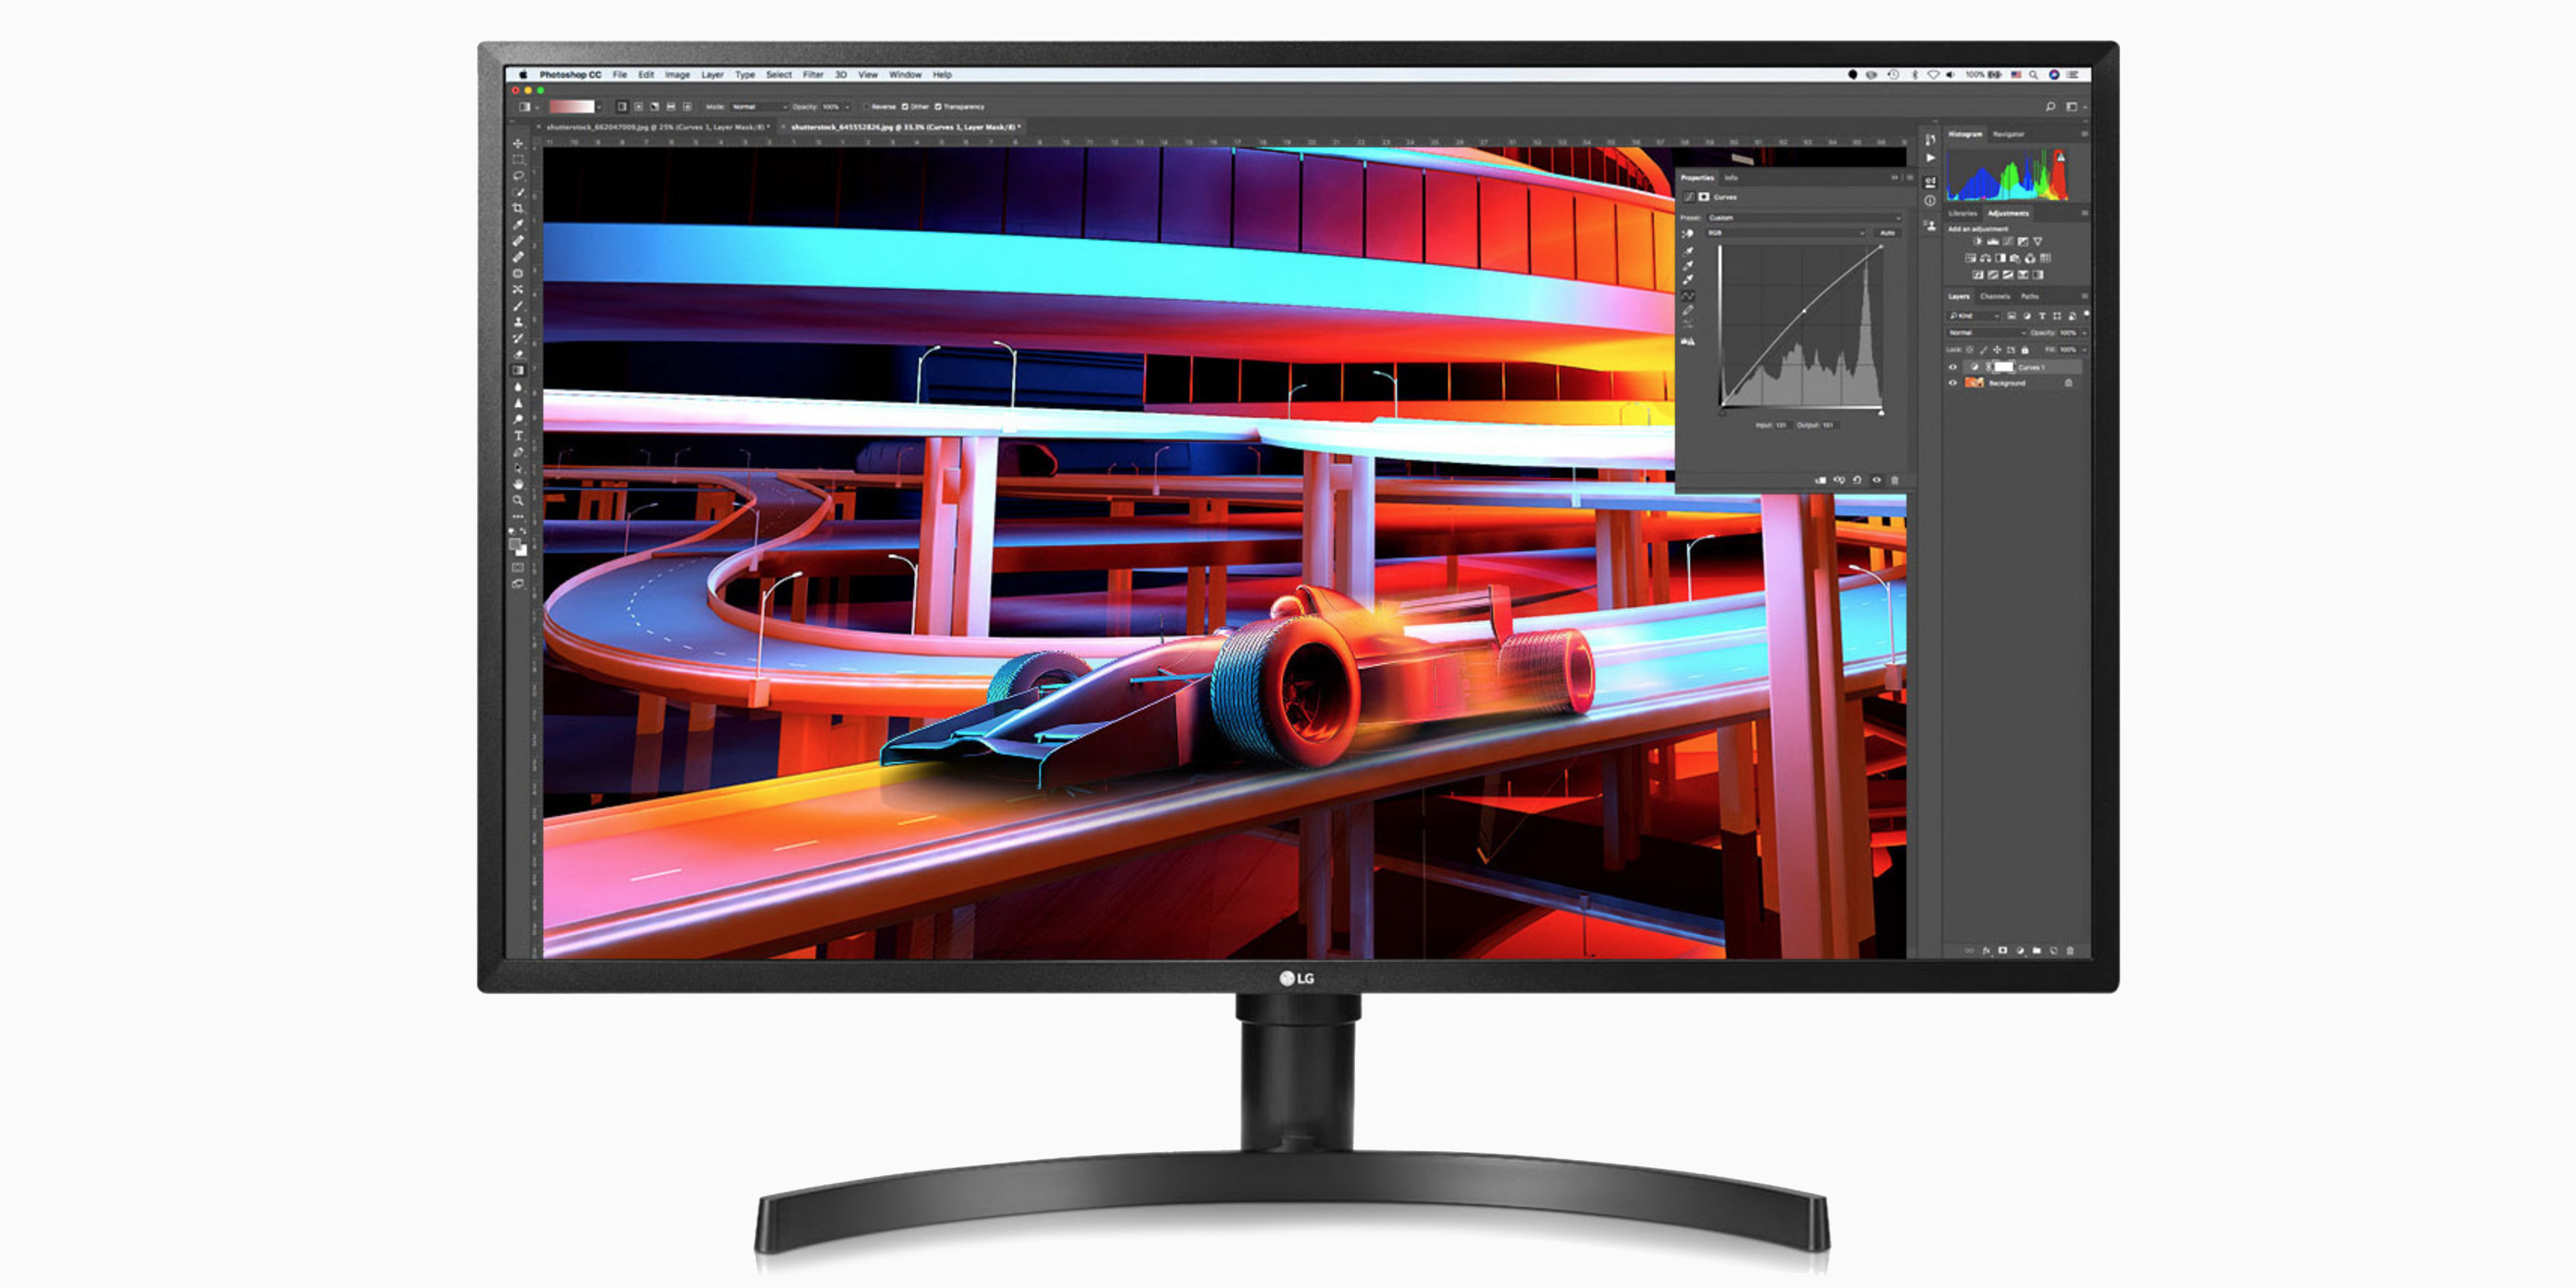 LG introduces new 32uk550-b 4K HDR monitor - 9to5Toys